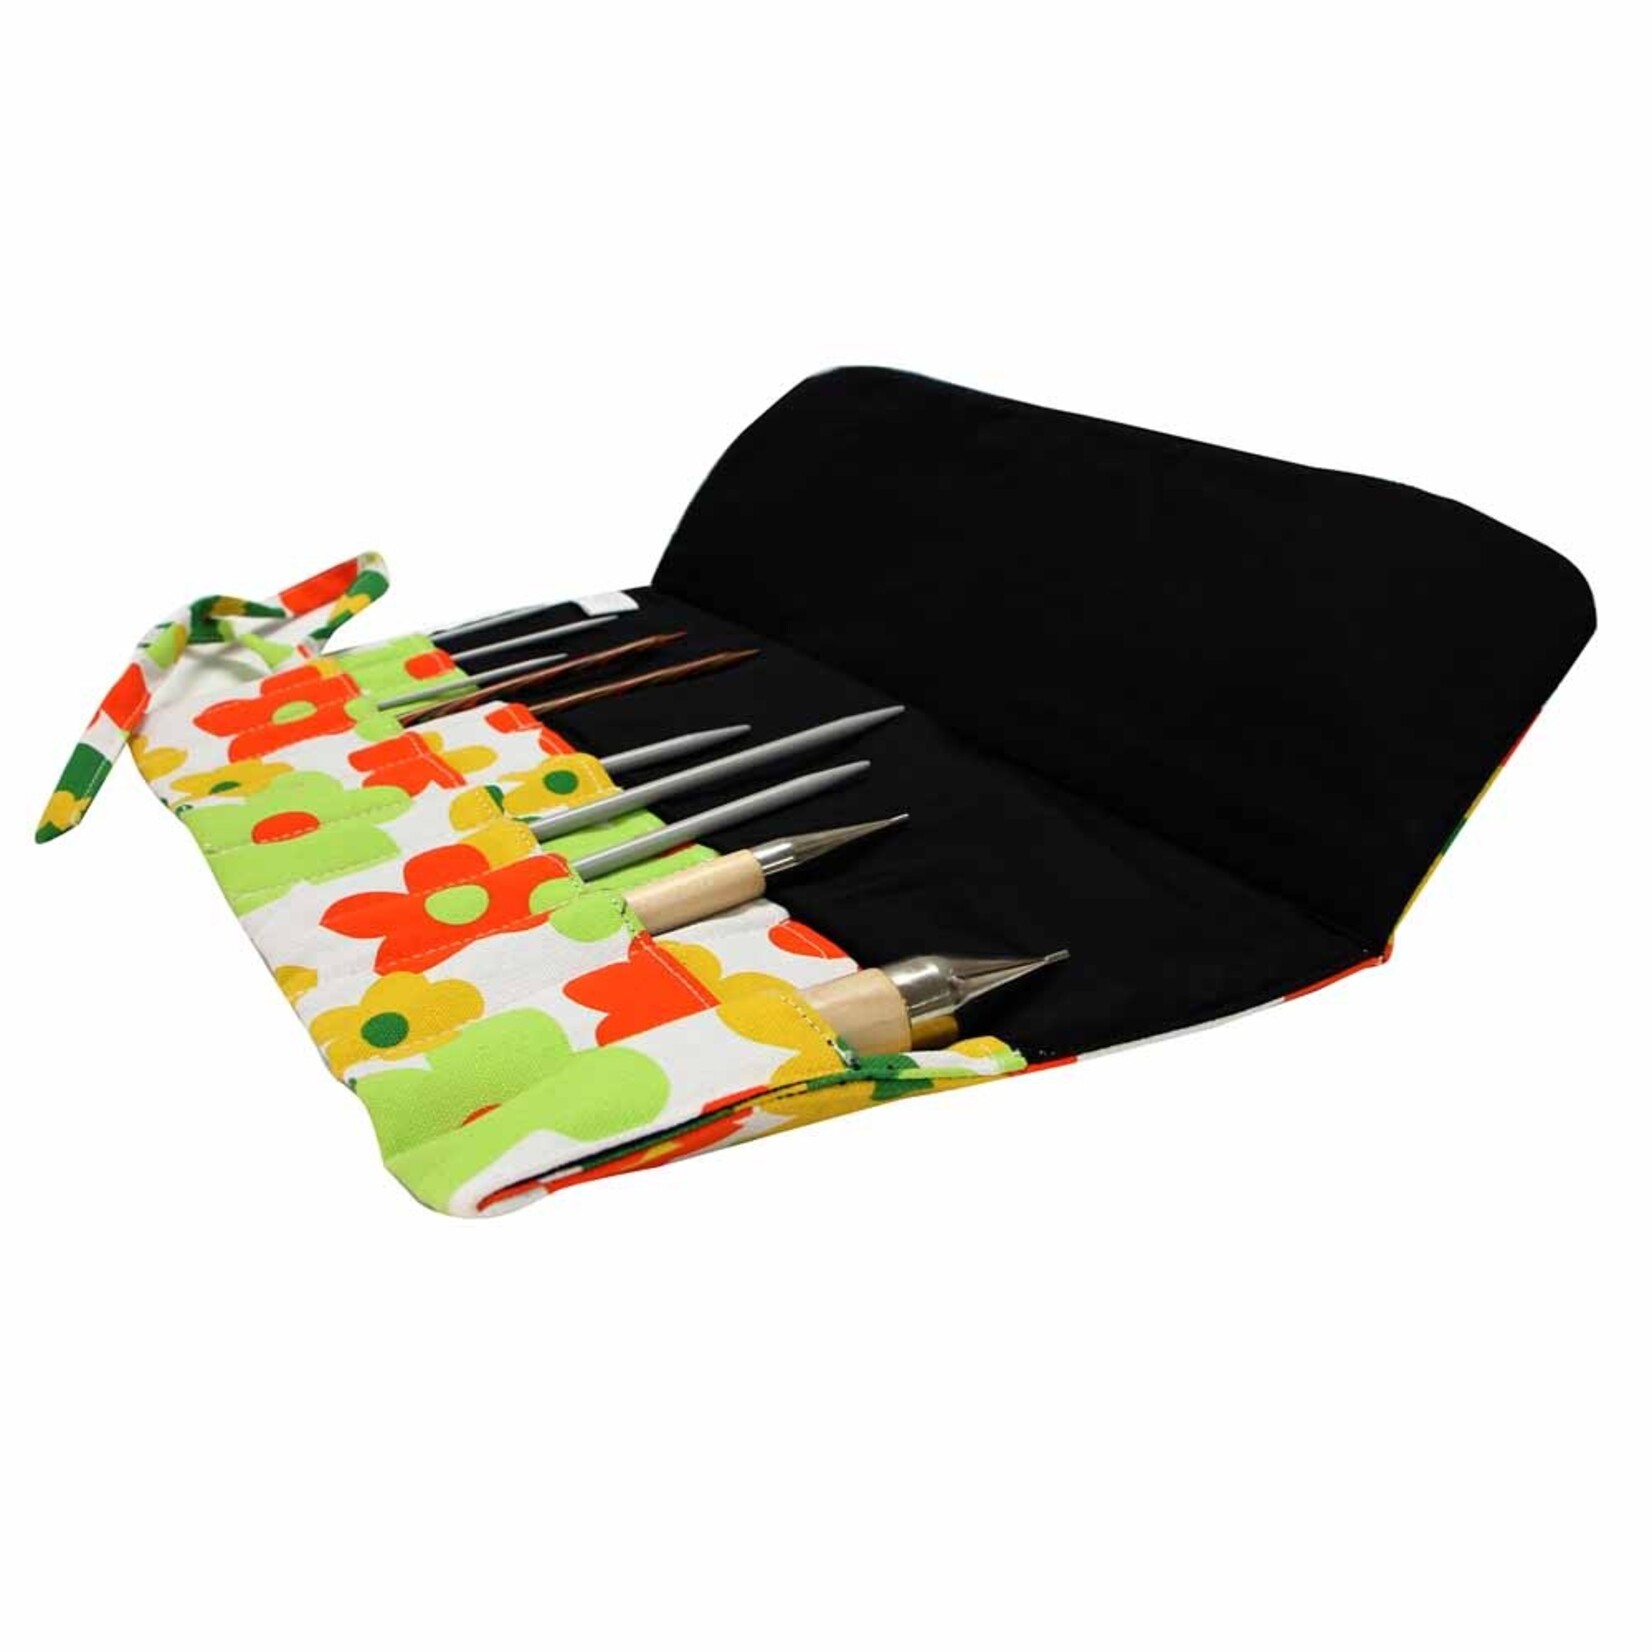 Vivace VIVACE Knitting Totes & Bags - Black with Floral